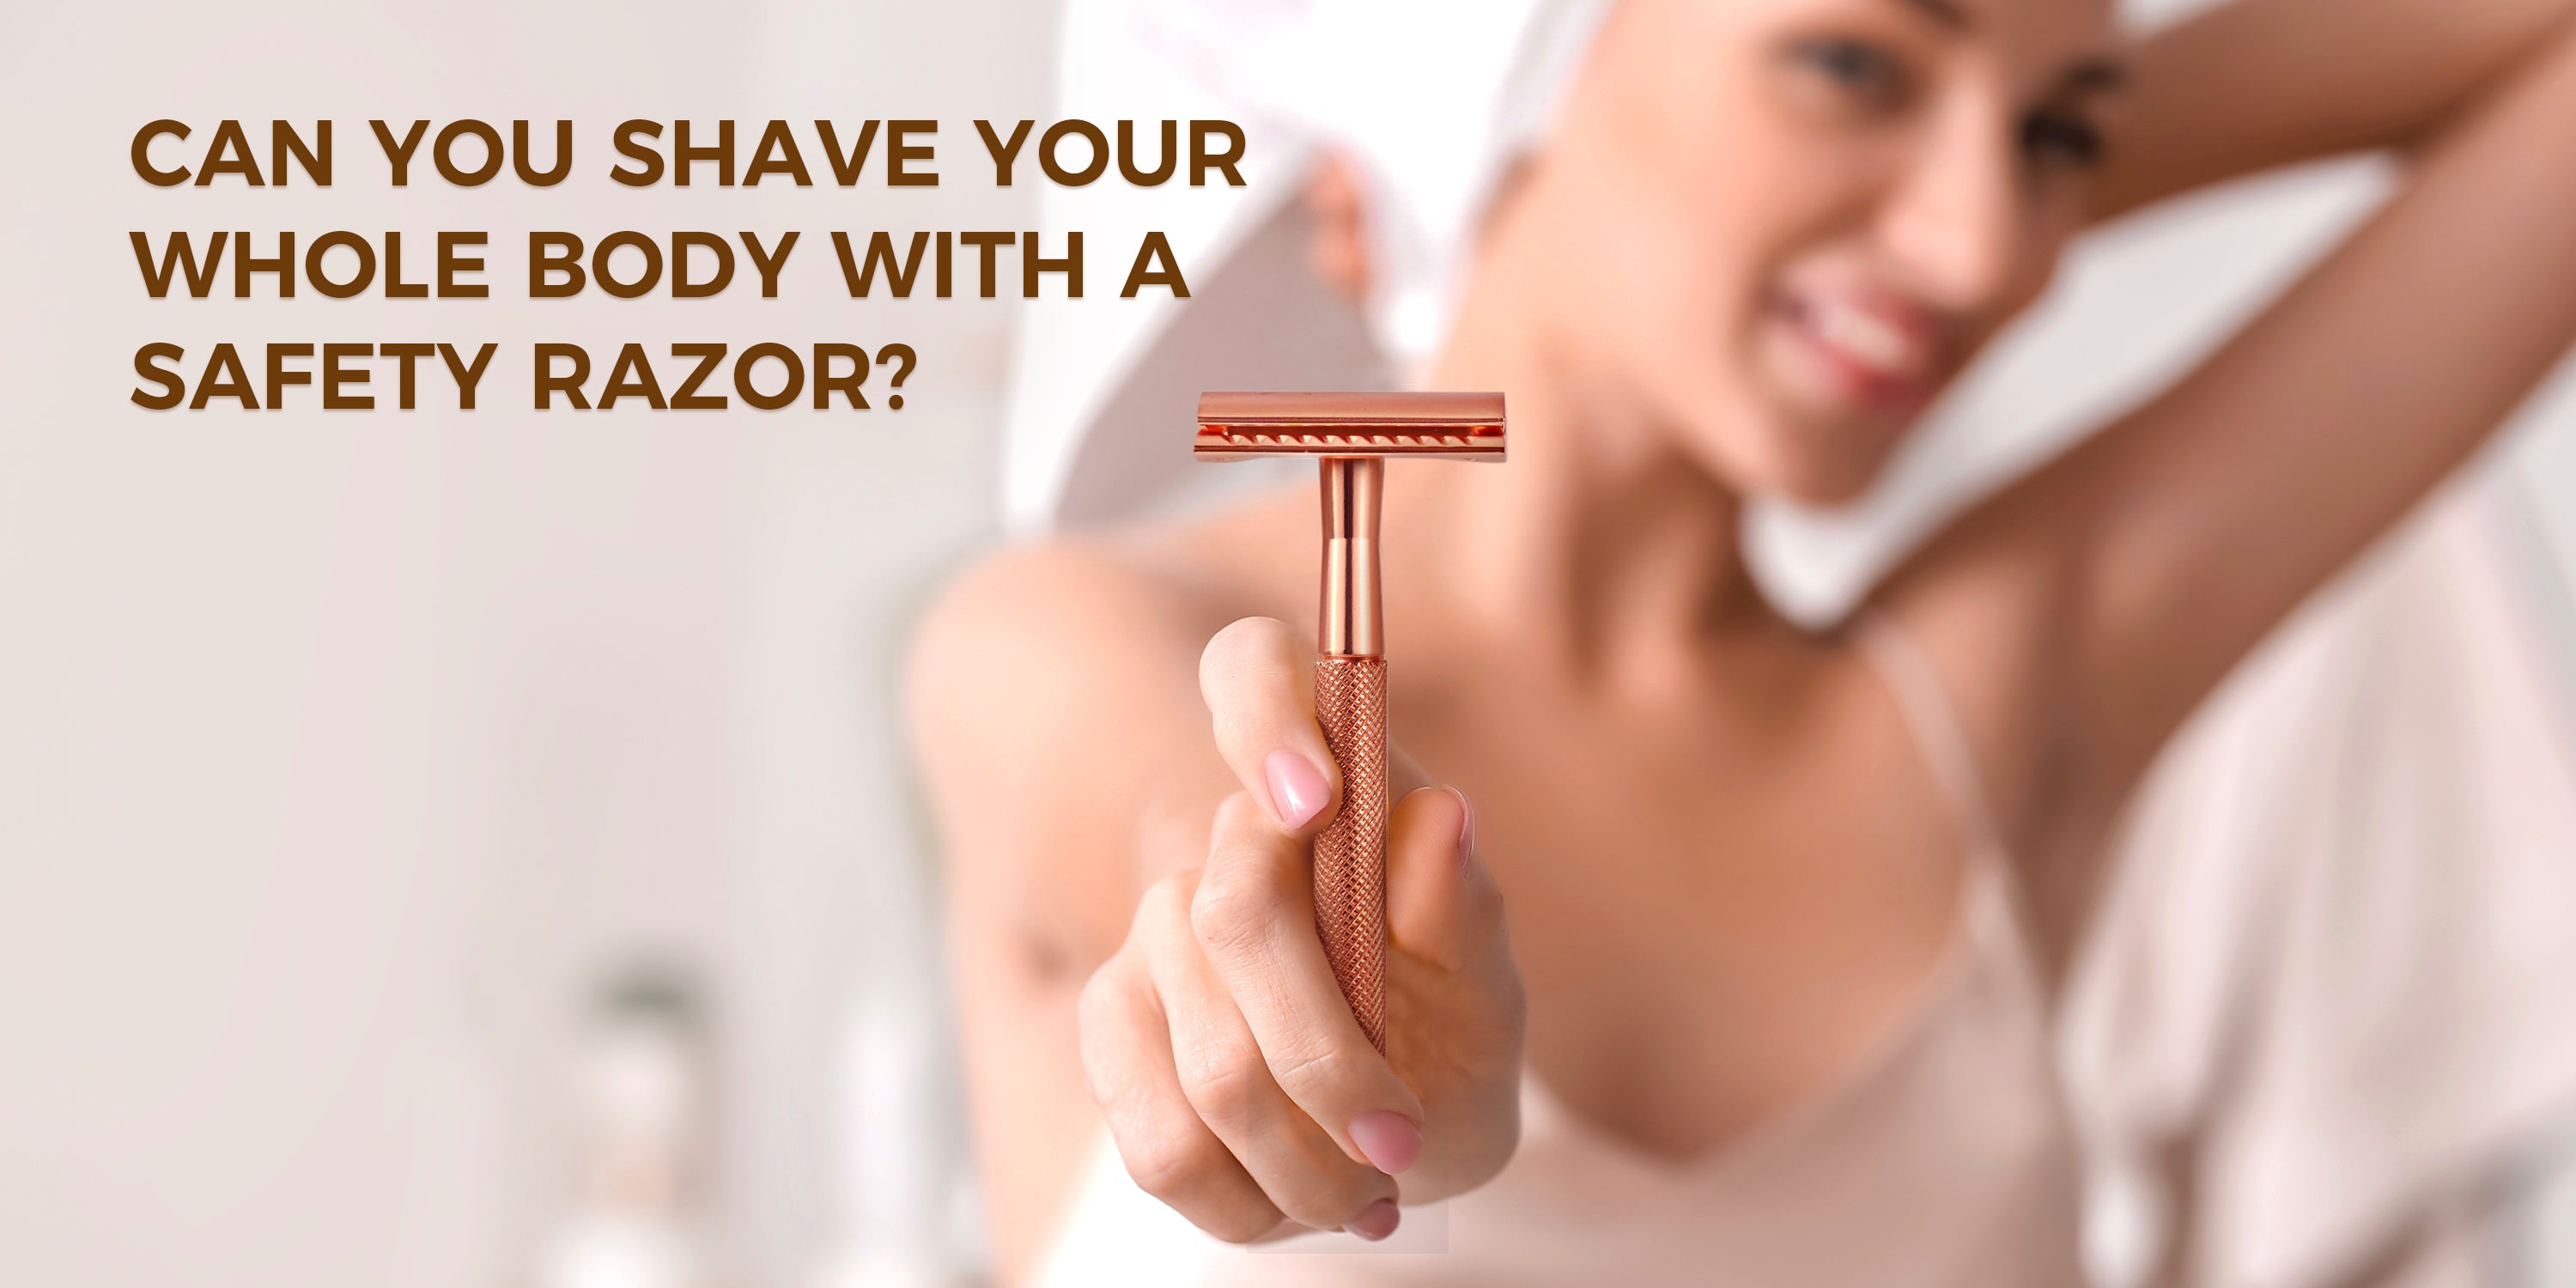 Can you shave your whole body with a safety razor?